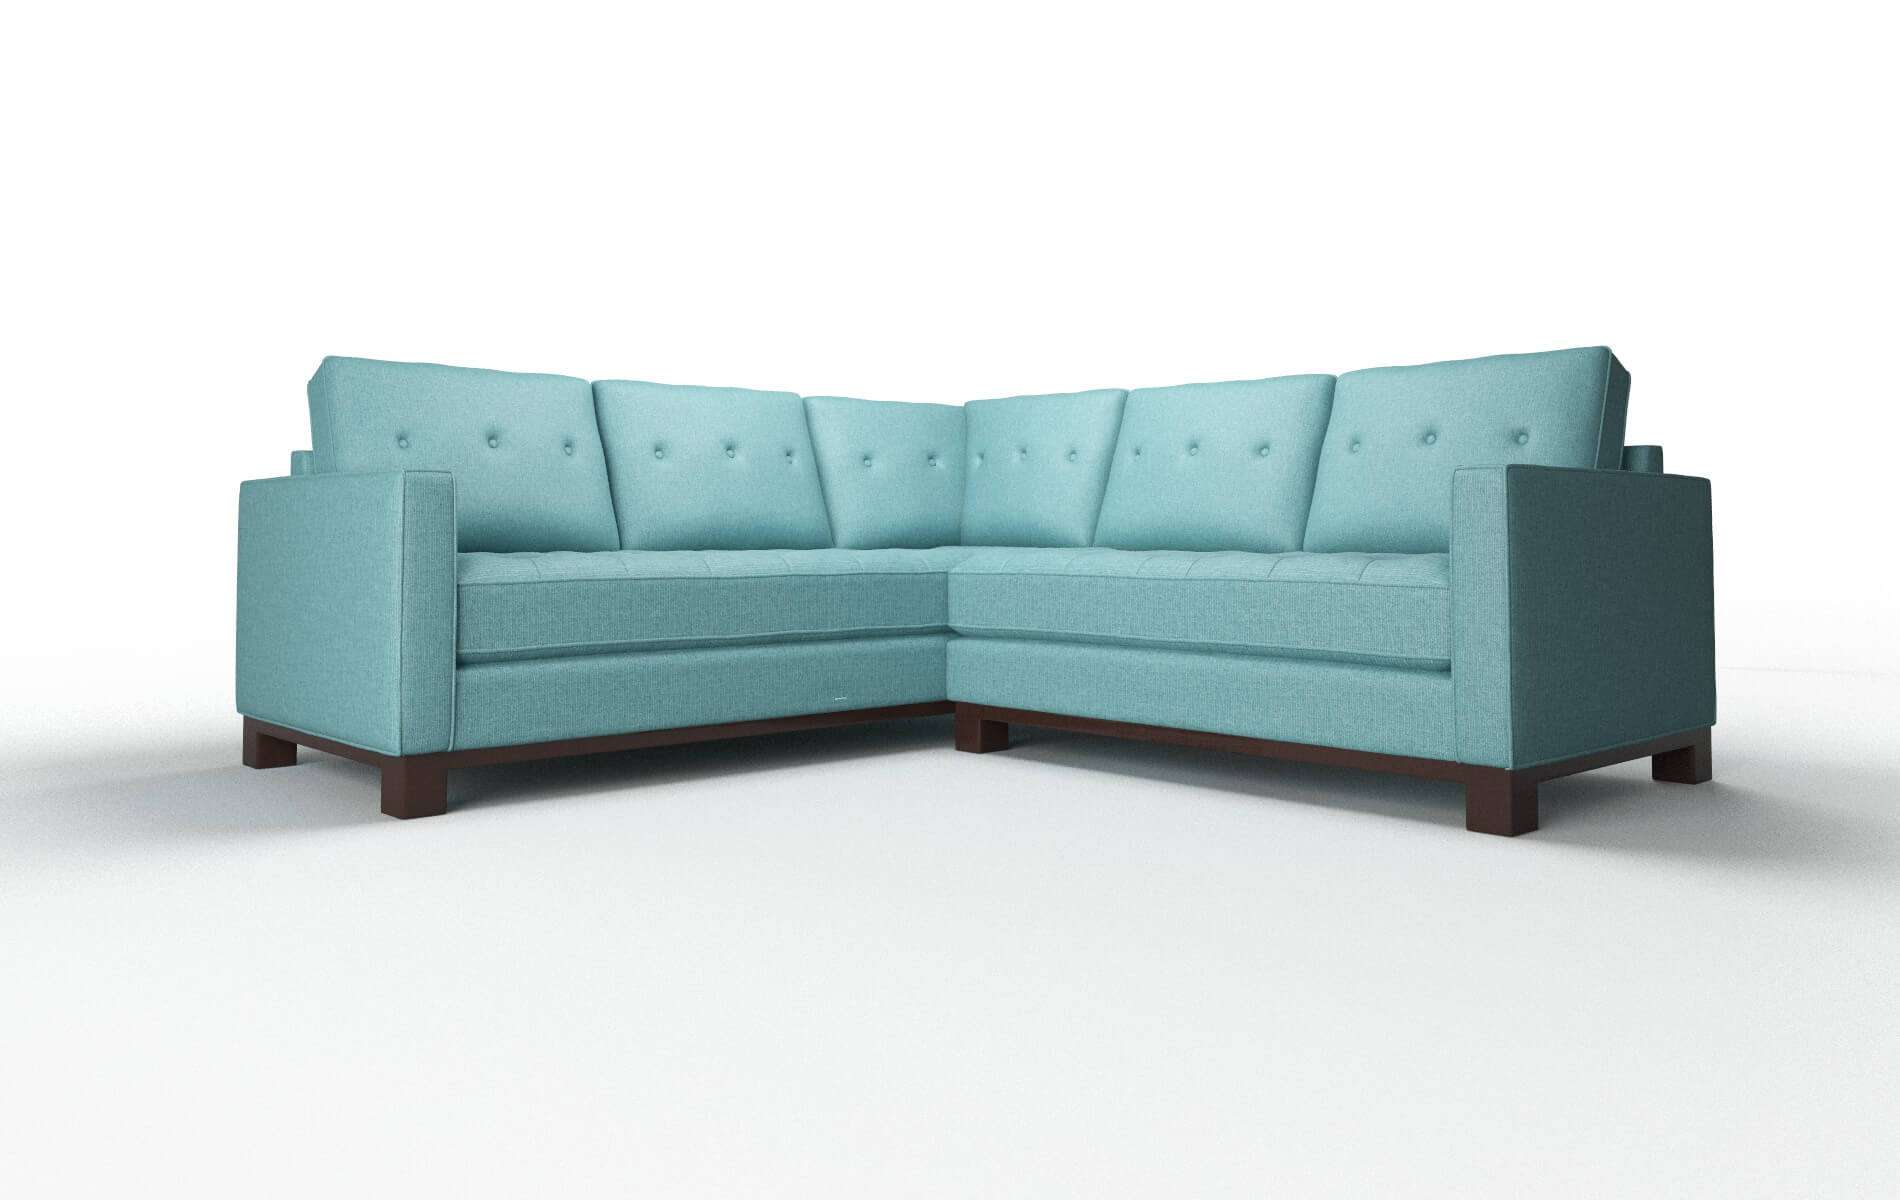 Syros Parker Turquoise Sectional espresso legs